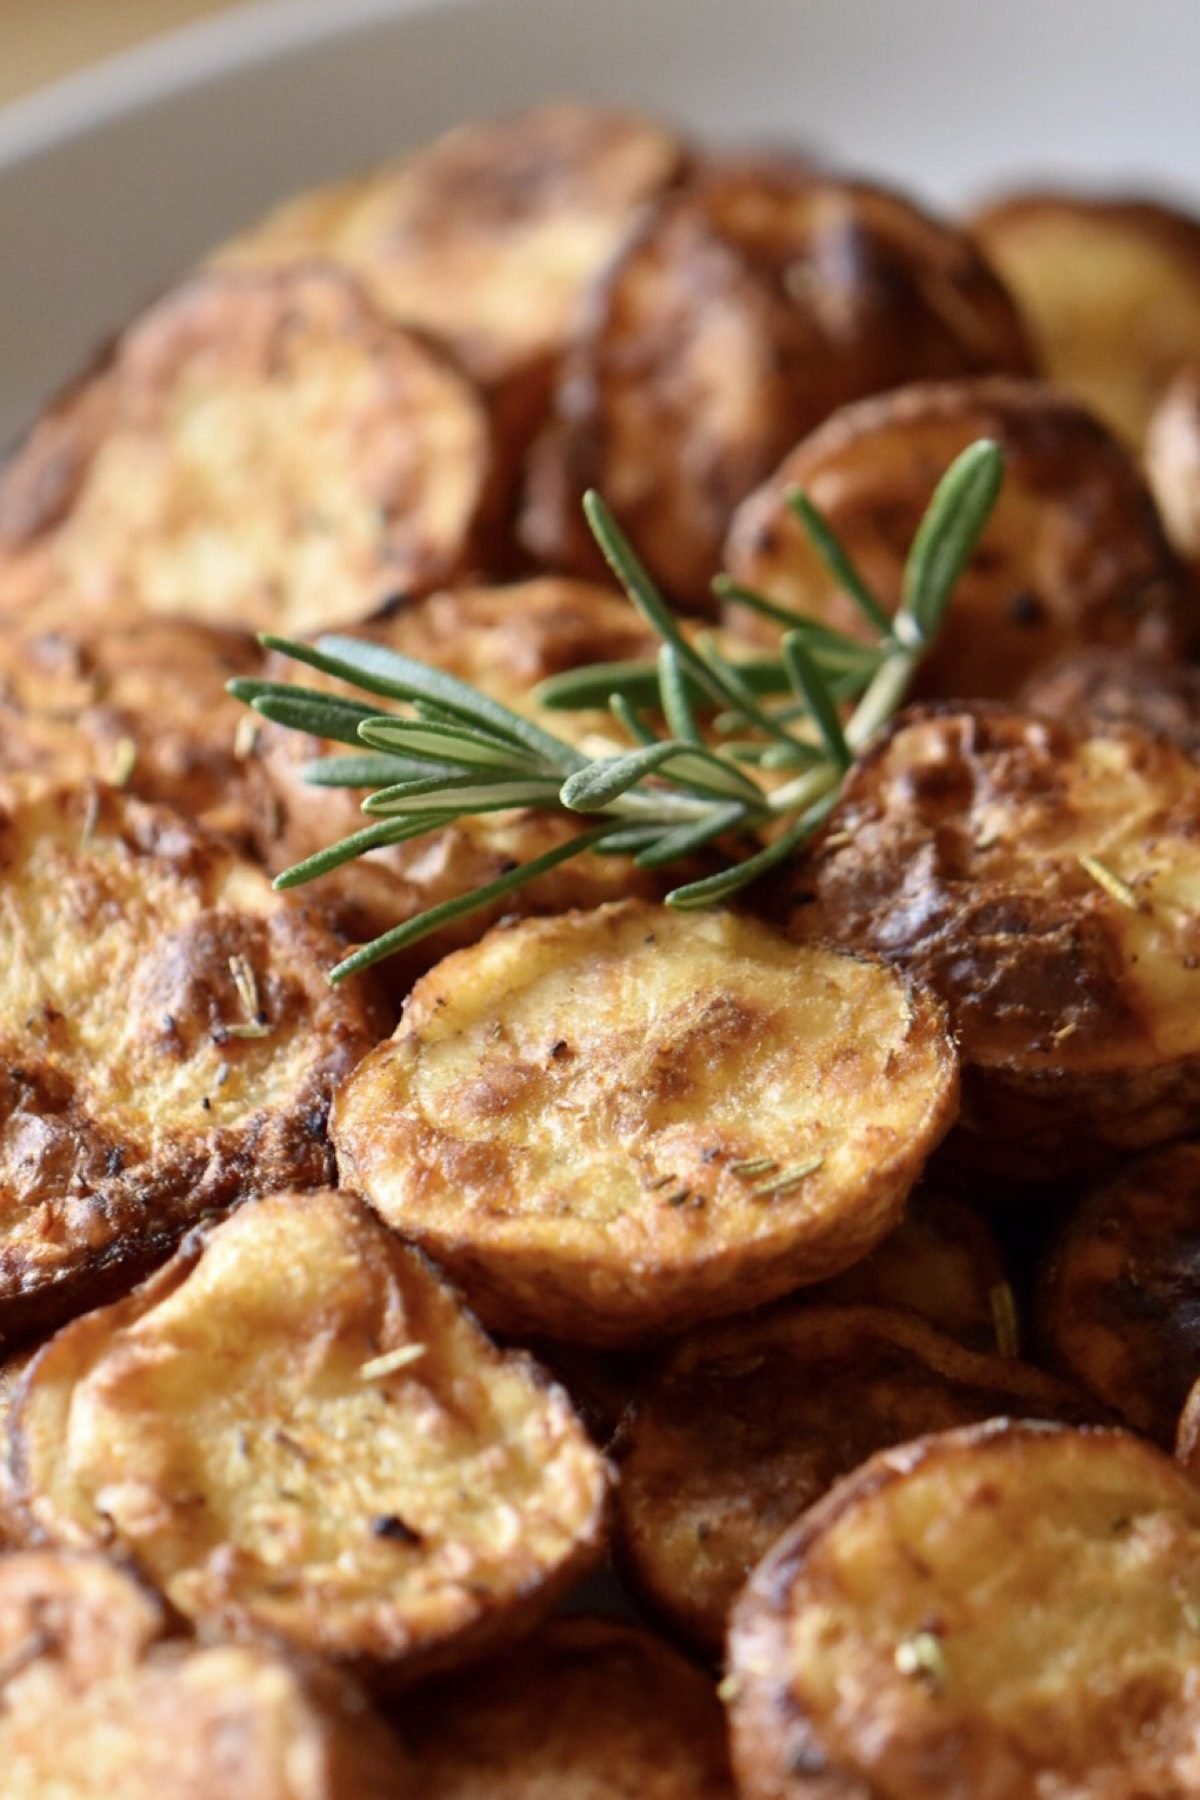 A pile of Air Fryer Potatoes garnished with a twig of rosemary.